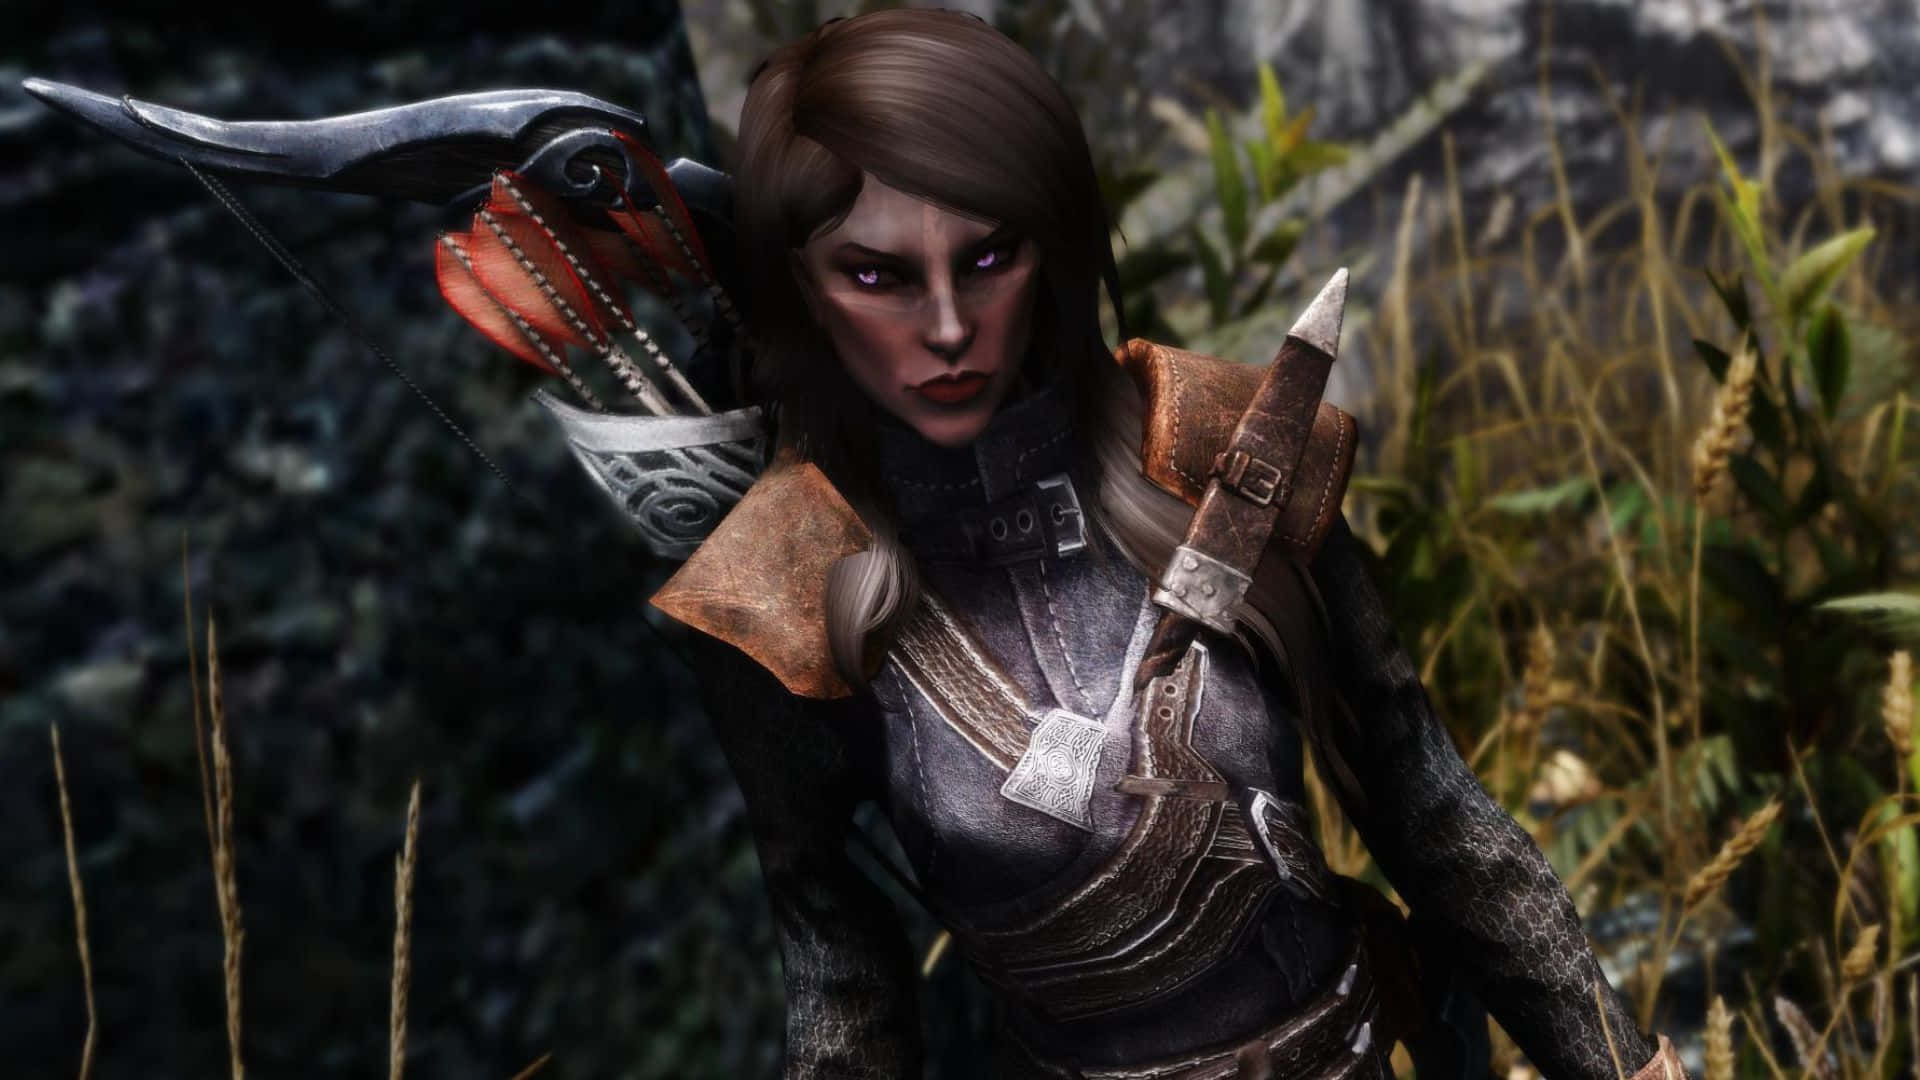 Karliah caught in action in the world of Skyrim Wallpaper